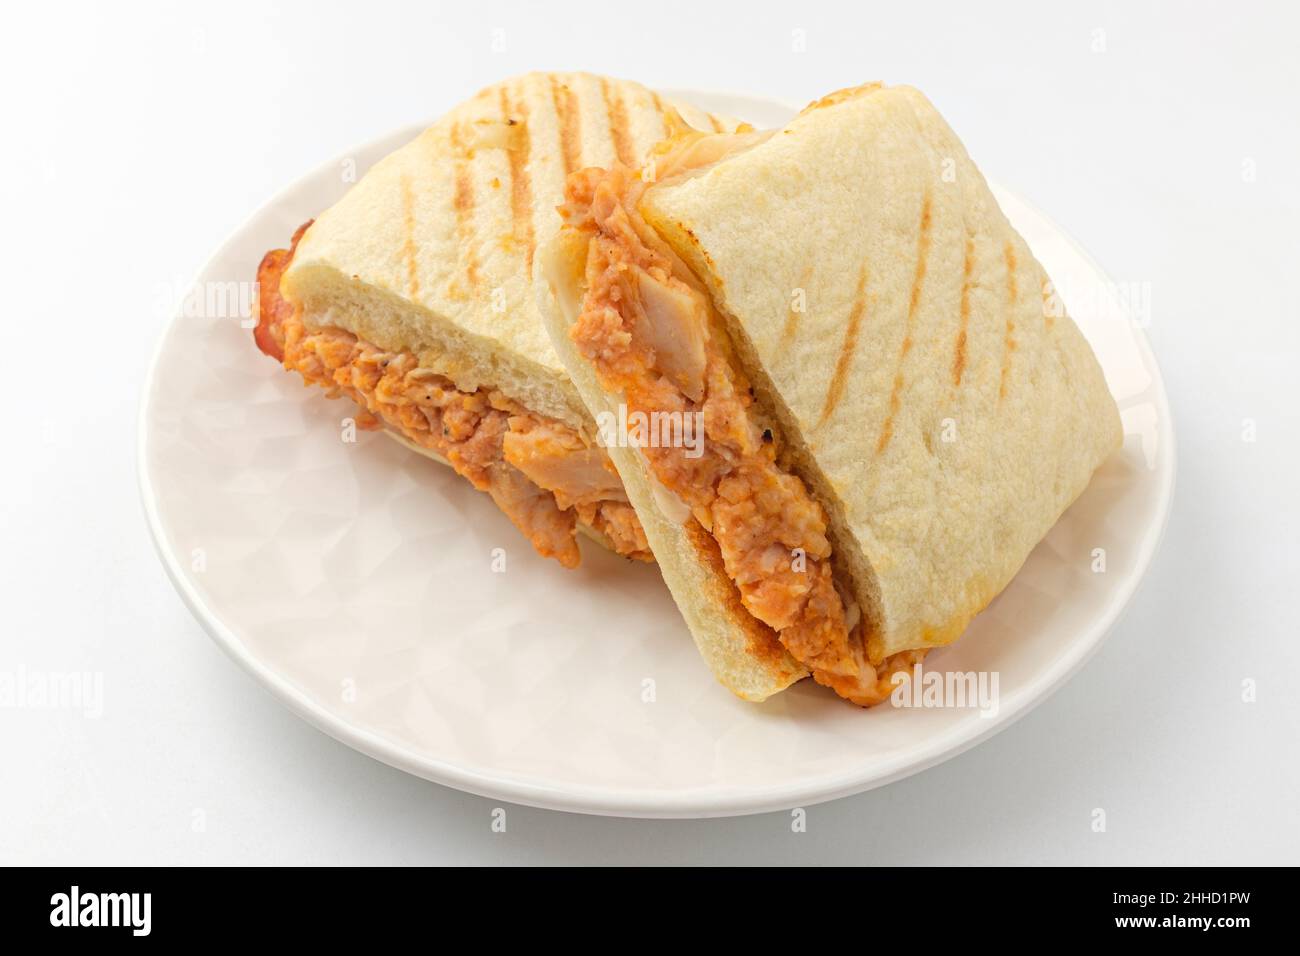 Sandwich with chicken. Bread with bacon. Bread with cheese Stock Photo